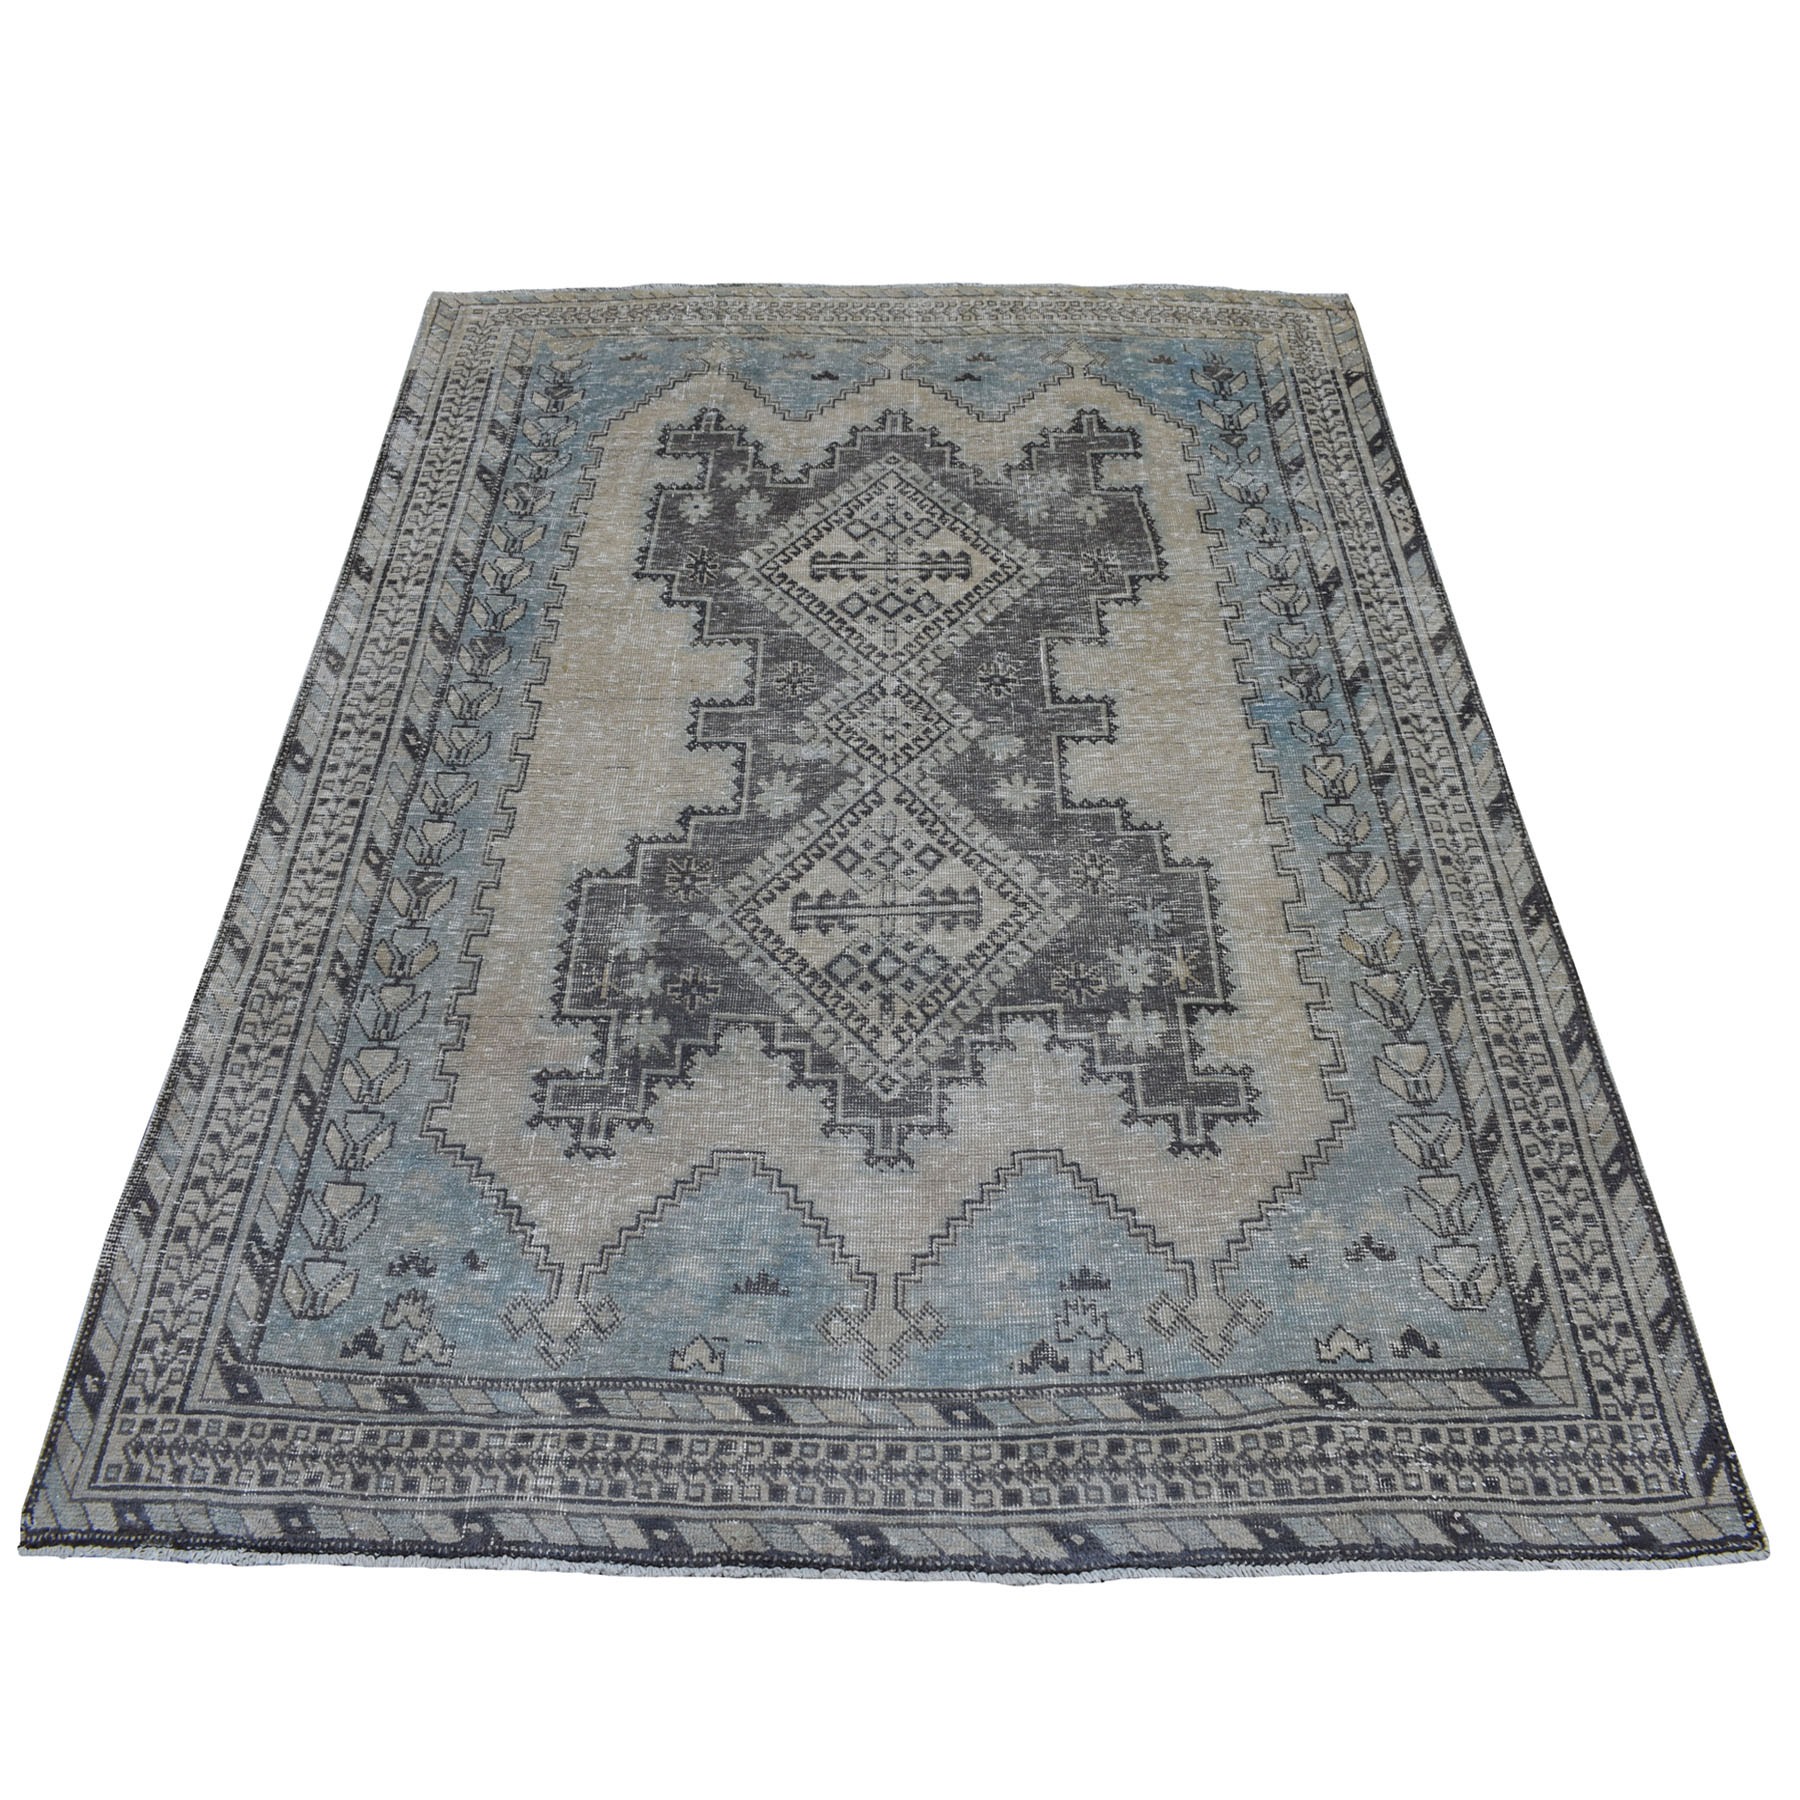 5'X6'8" Vintage And Worn Down Distressed Colors Persian Qashqai Hand Knotted Bohemian Rug moaed0d8